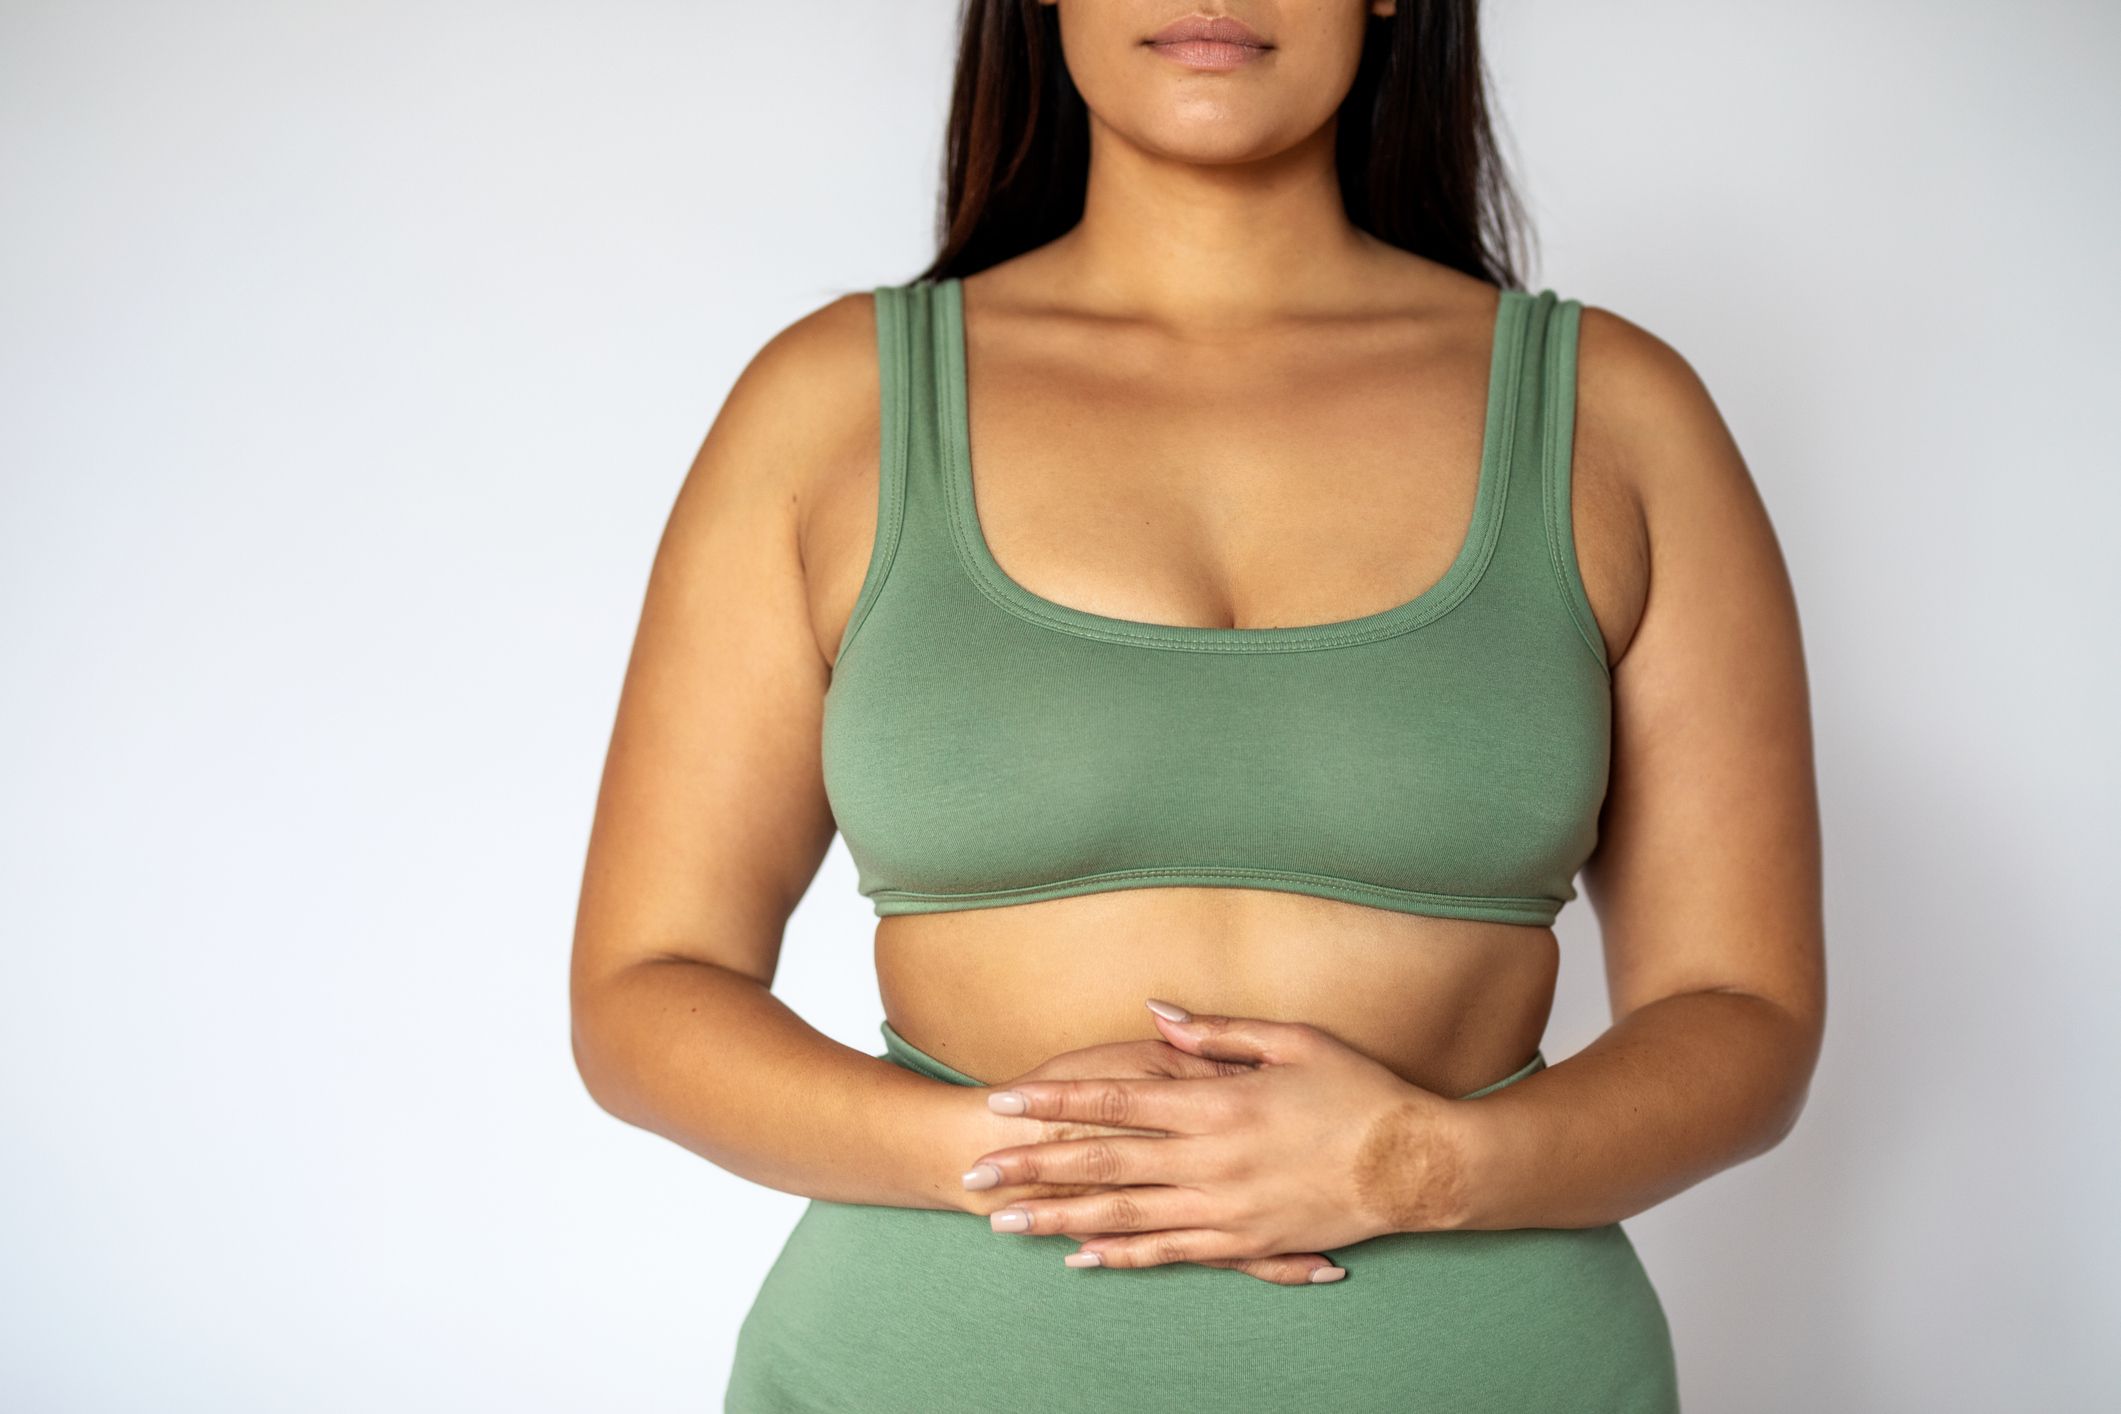 5 Foods that Beat Bloating and Help Achieve a Flat Belly